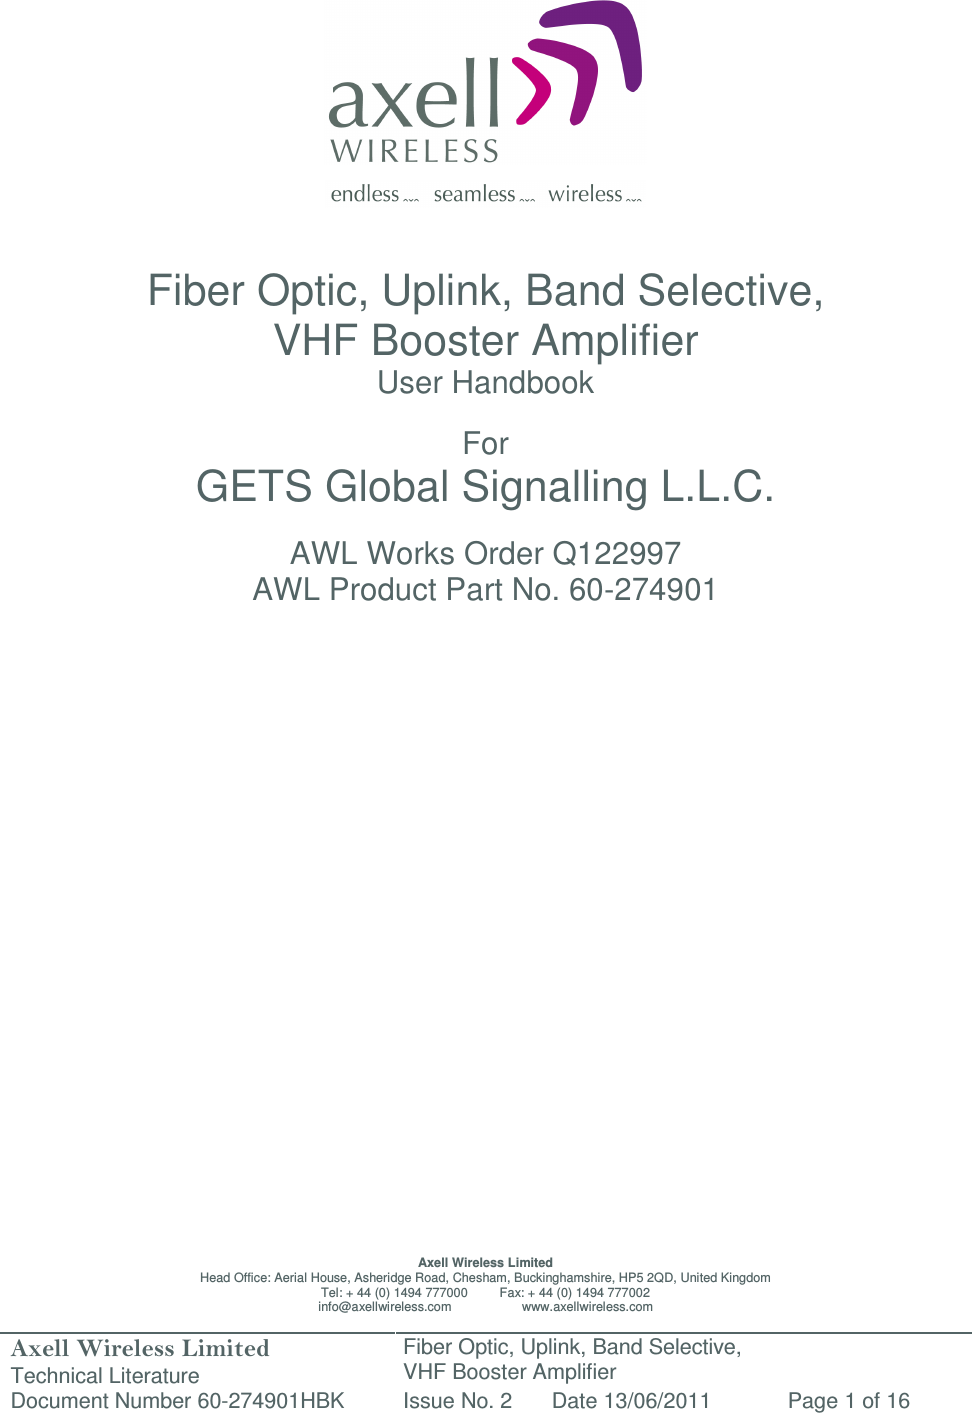 Axell Wireless Limited Technical Literature Fiber Optic, Uplink, Band Selective,  VHF Booster Amplifier Document Number 60-274901HBK Issue No. 2 Date 13/06/2011 Page 1 of 16                   Fiber Optic, Uplink, Band Selective,  VHF Booster Amplifier User Handbook  For GETS Global Signalling L.L.C.  AWL Works Order Q122997 AWL Product Part No. 60-274901                           Axell Wireless Limited Head Office: Aerial House, Asheridge Road, Chesham, Buckinghamshire, HP5 2QD, United Kingdom Tel: + 44 (0) 1494 777000         Fax: + 44 (0) 1494 777002 info@axellwireless.com                    www.axellwireless.com 